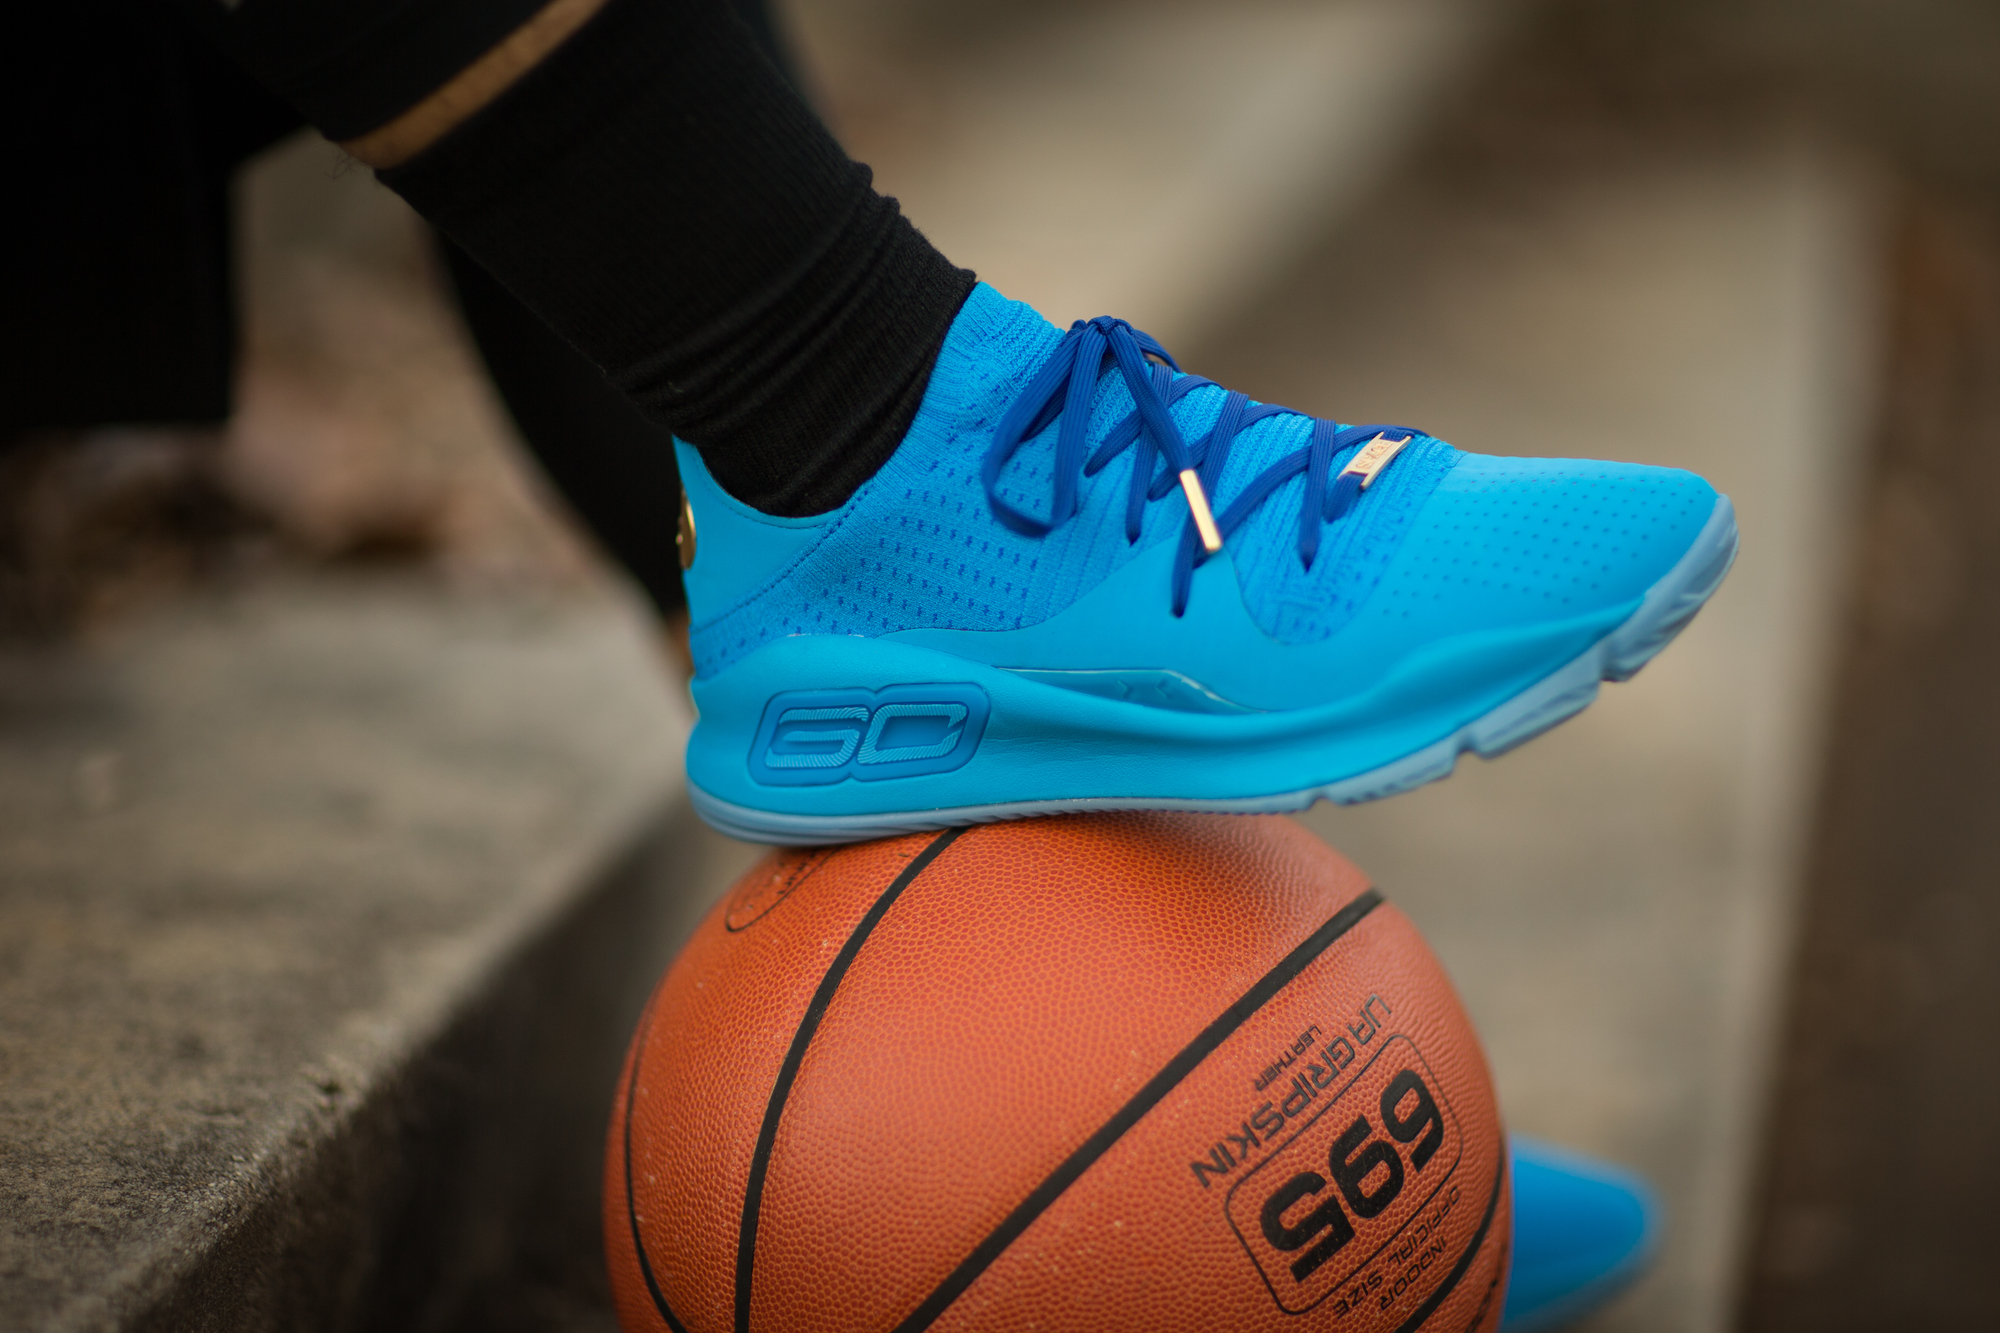 Under Armour Curry 4 low color pack 